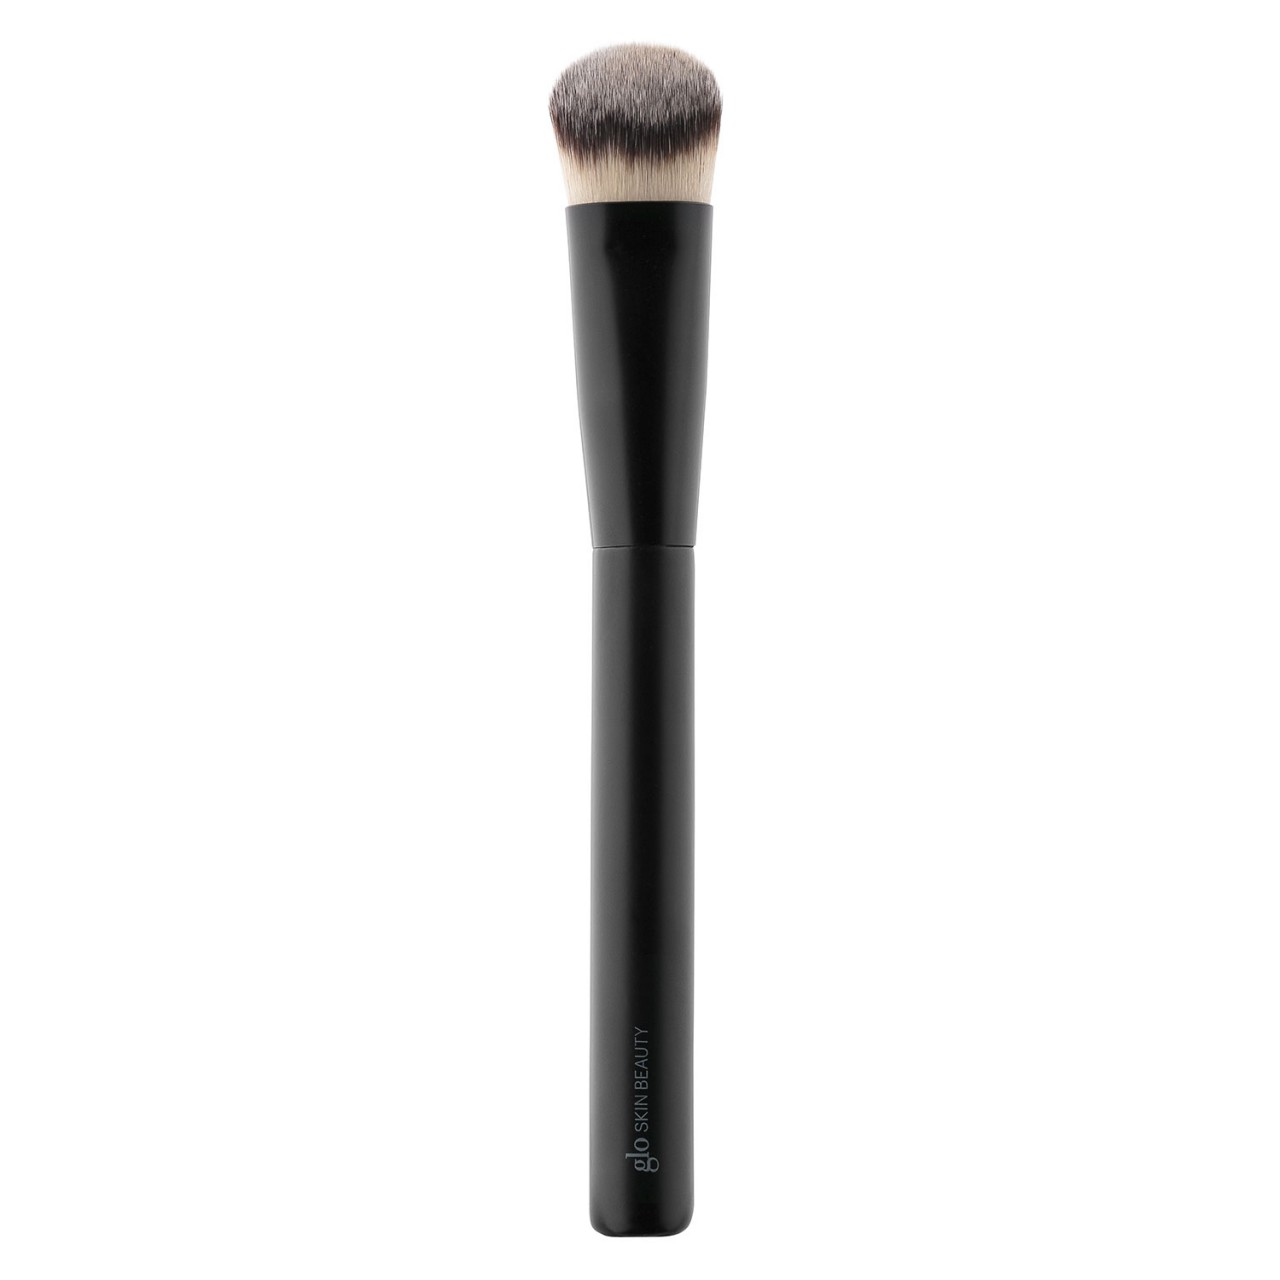 Glo Skin Beauty Tools - Angled Complexion Brush von Glo Skin Beauty